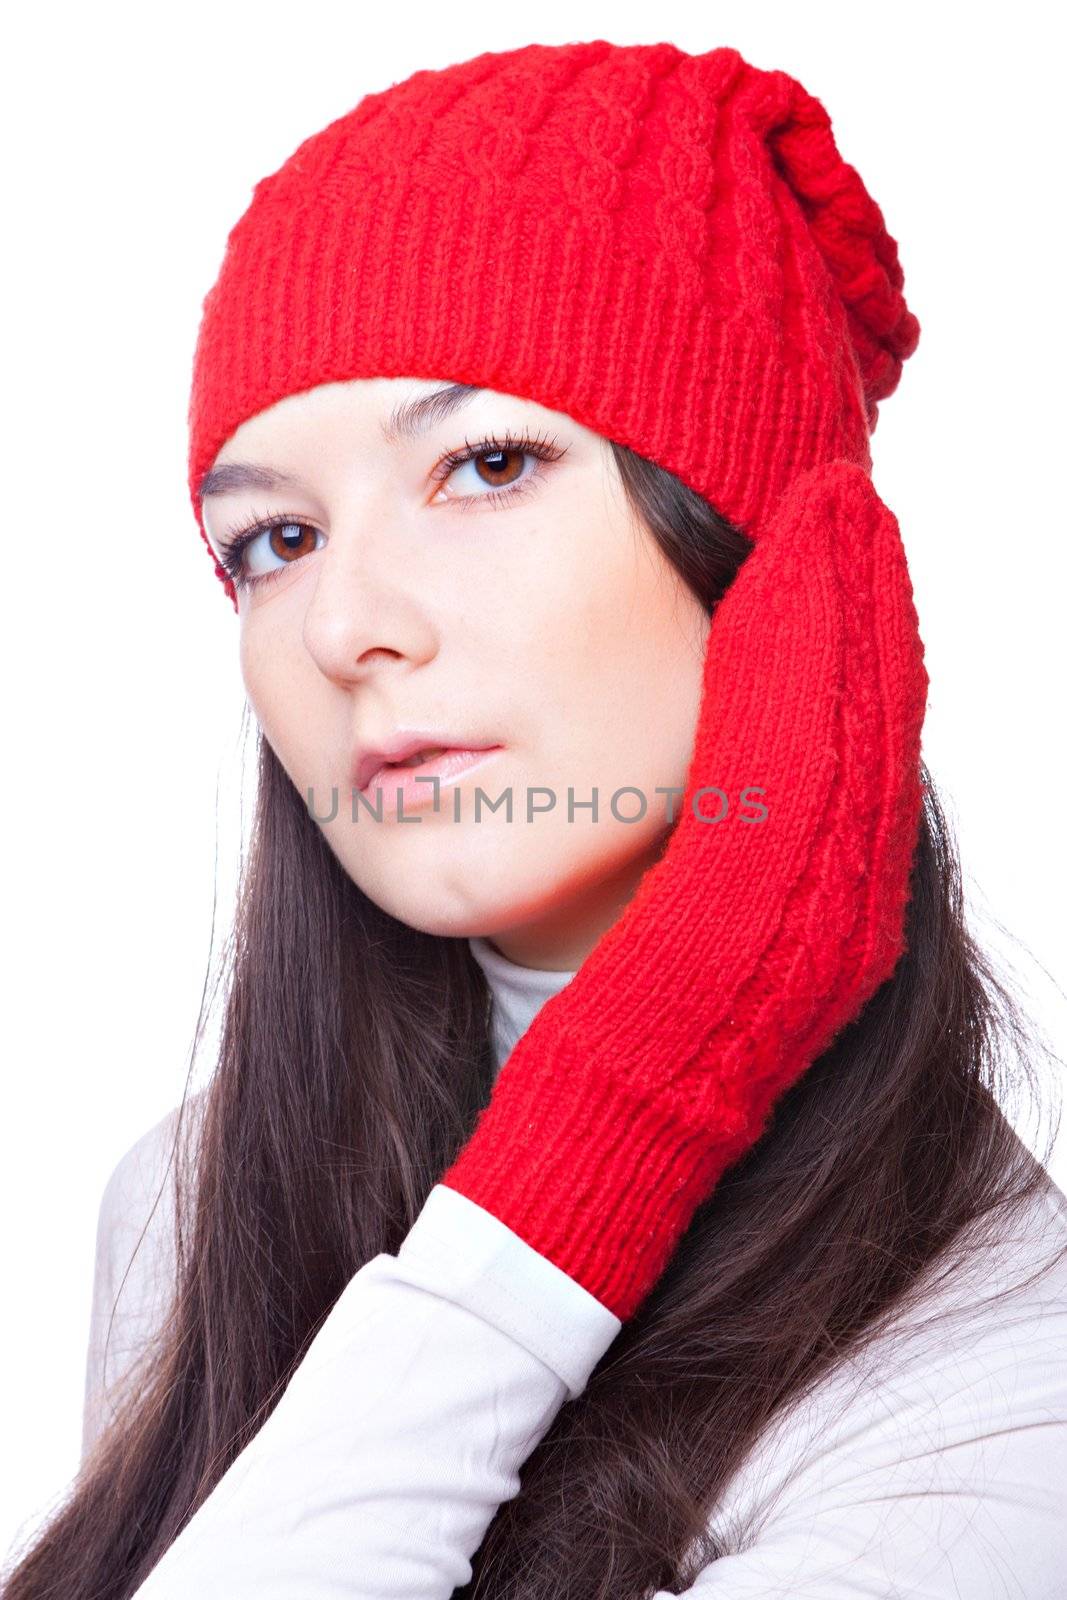 beauty woman in a red cap and mittens by nigerfoxy